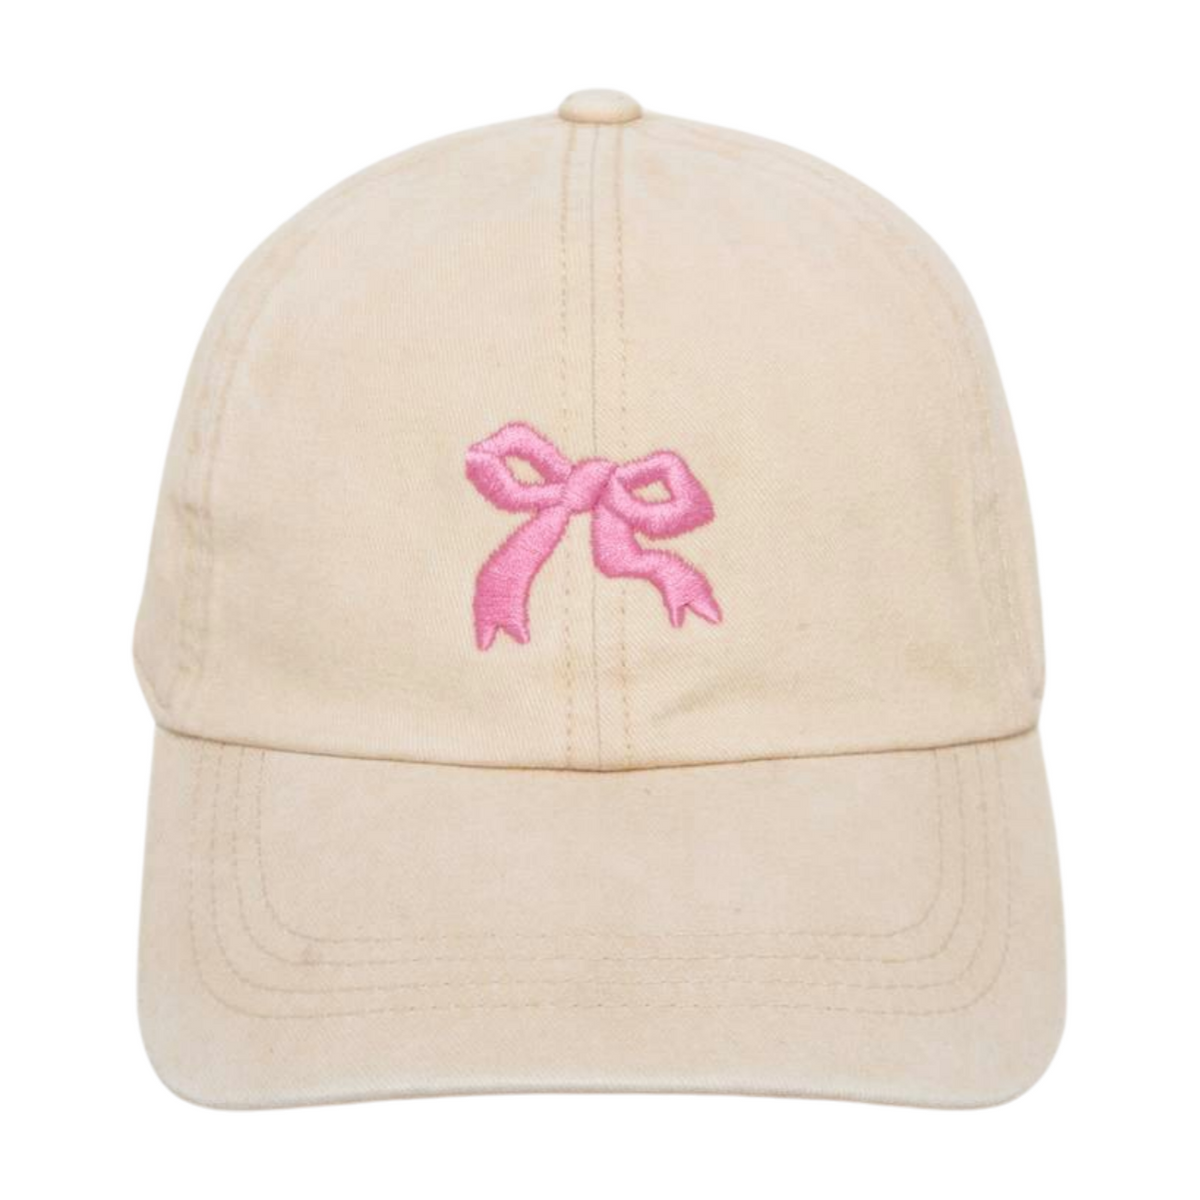 LCAP3621 - SMALL BOW EMBROIDERED ON COTTON HAT